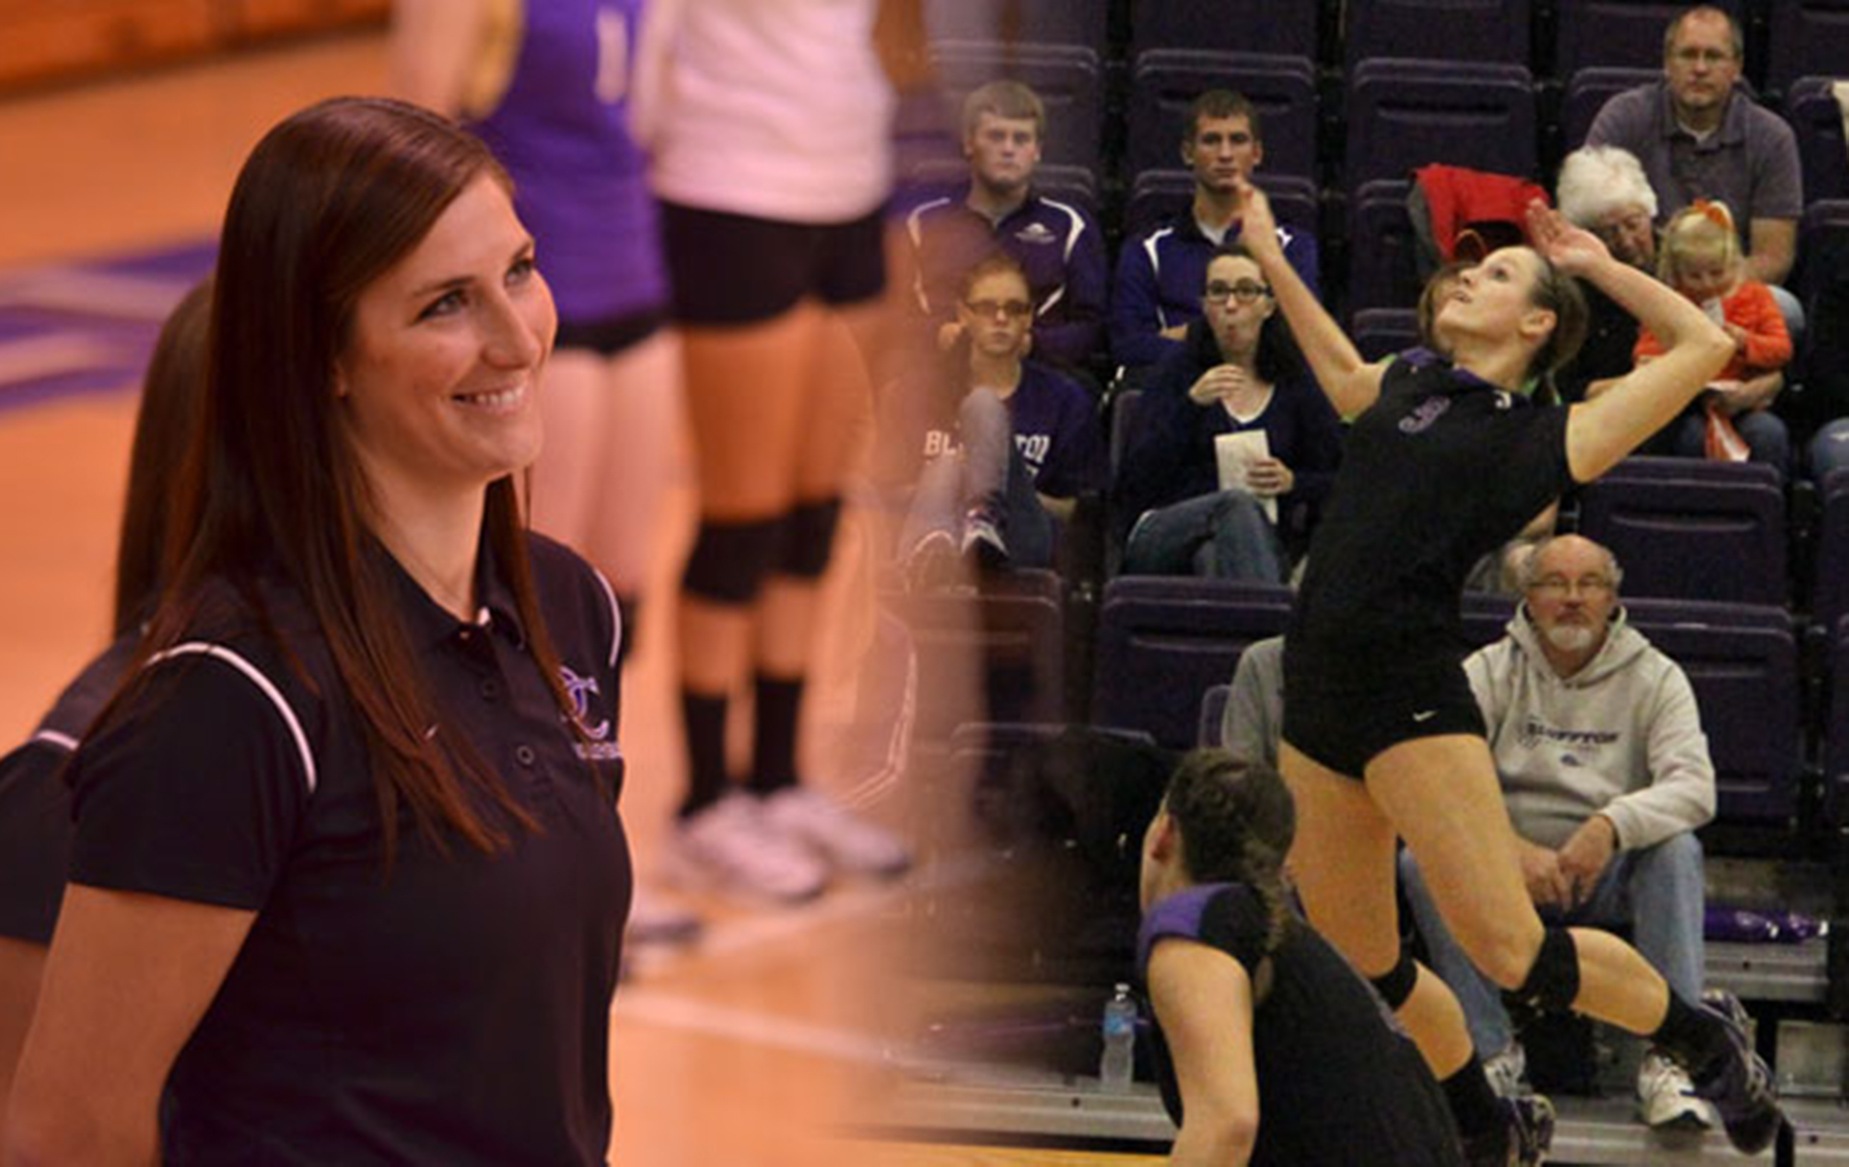 Brenner, Ludeman pair for HCAC Coach and Player of the Year